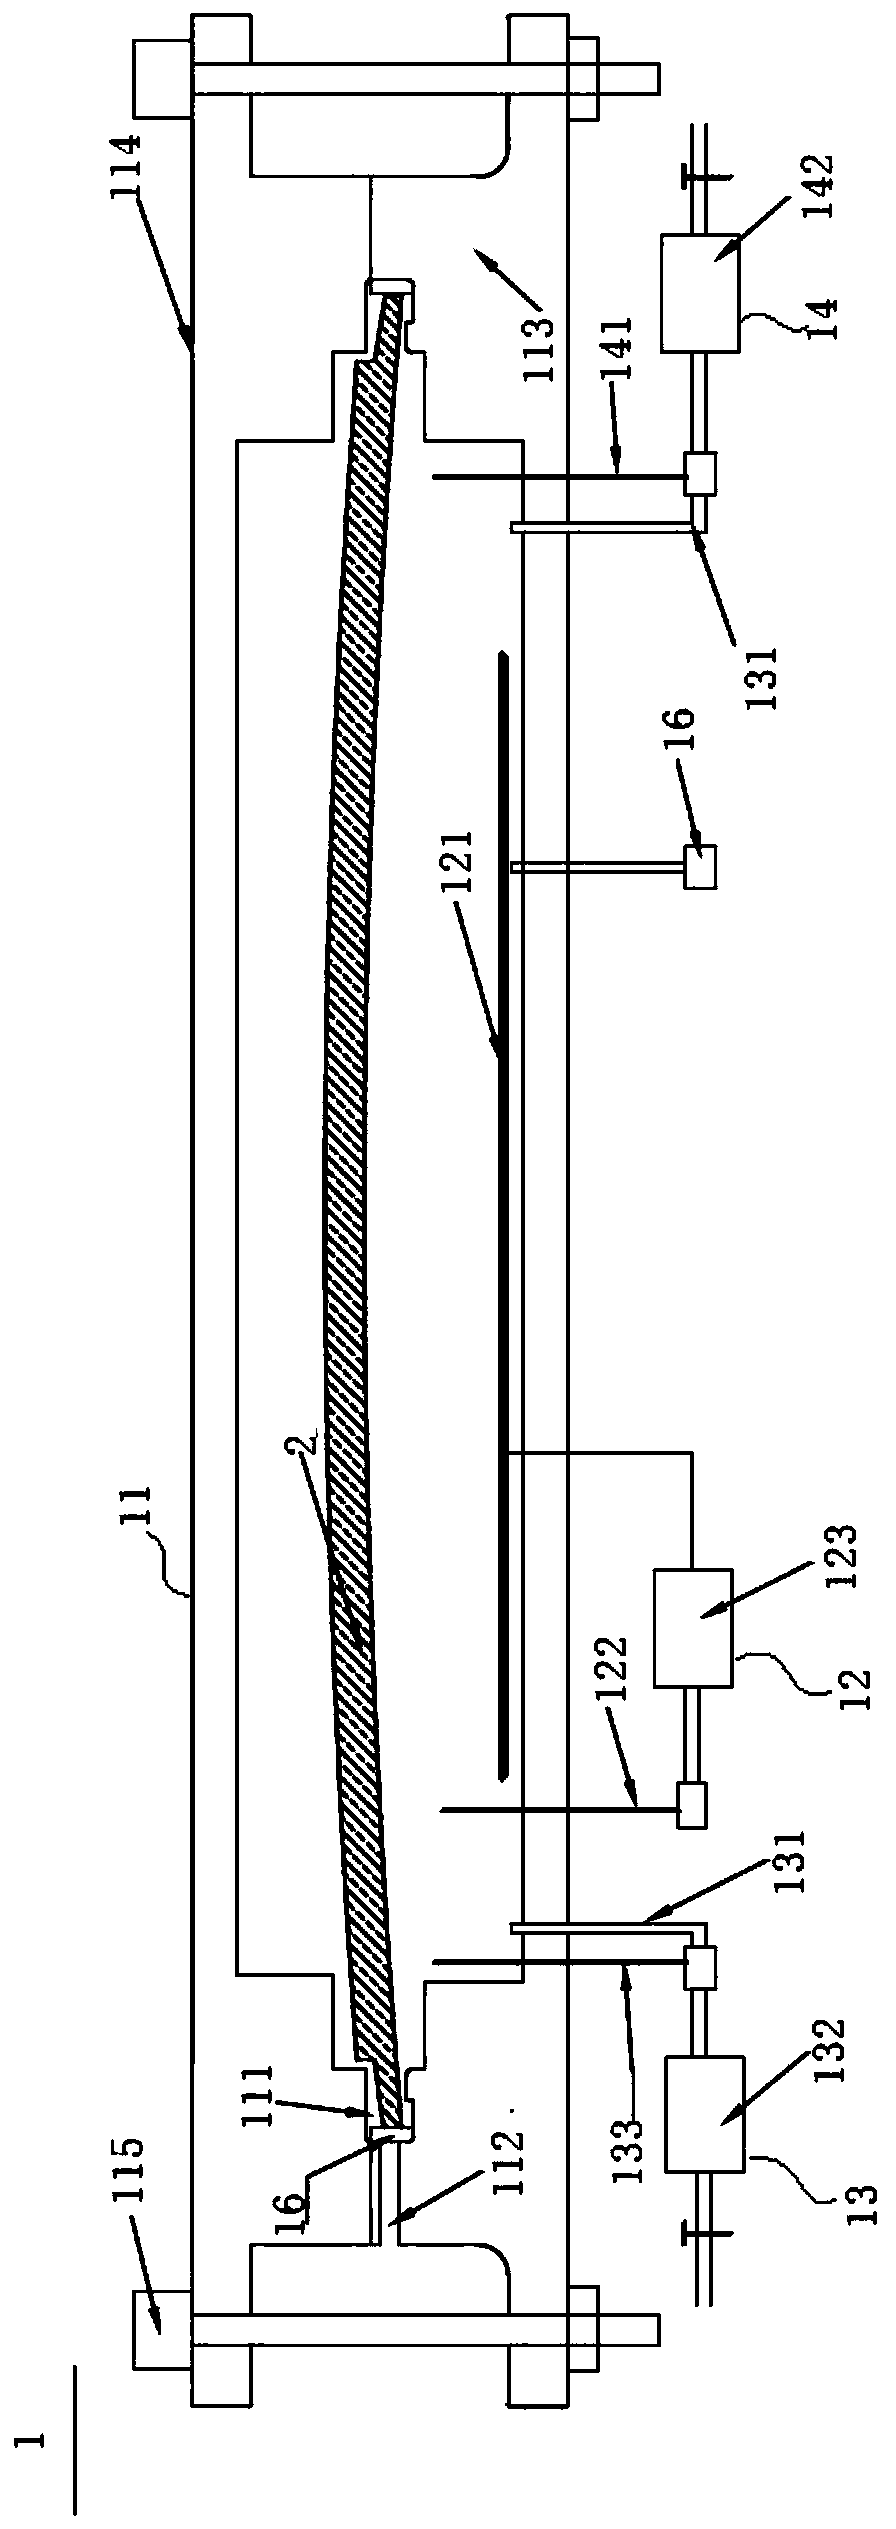 Edge covering device and method applied to glass